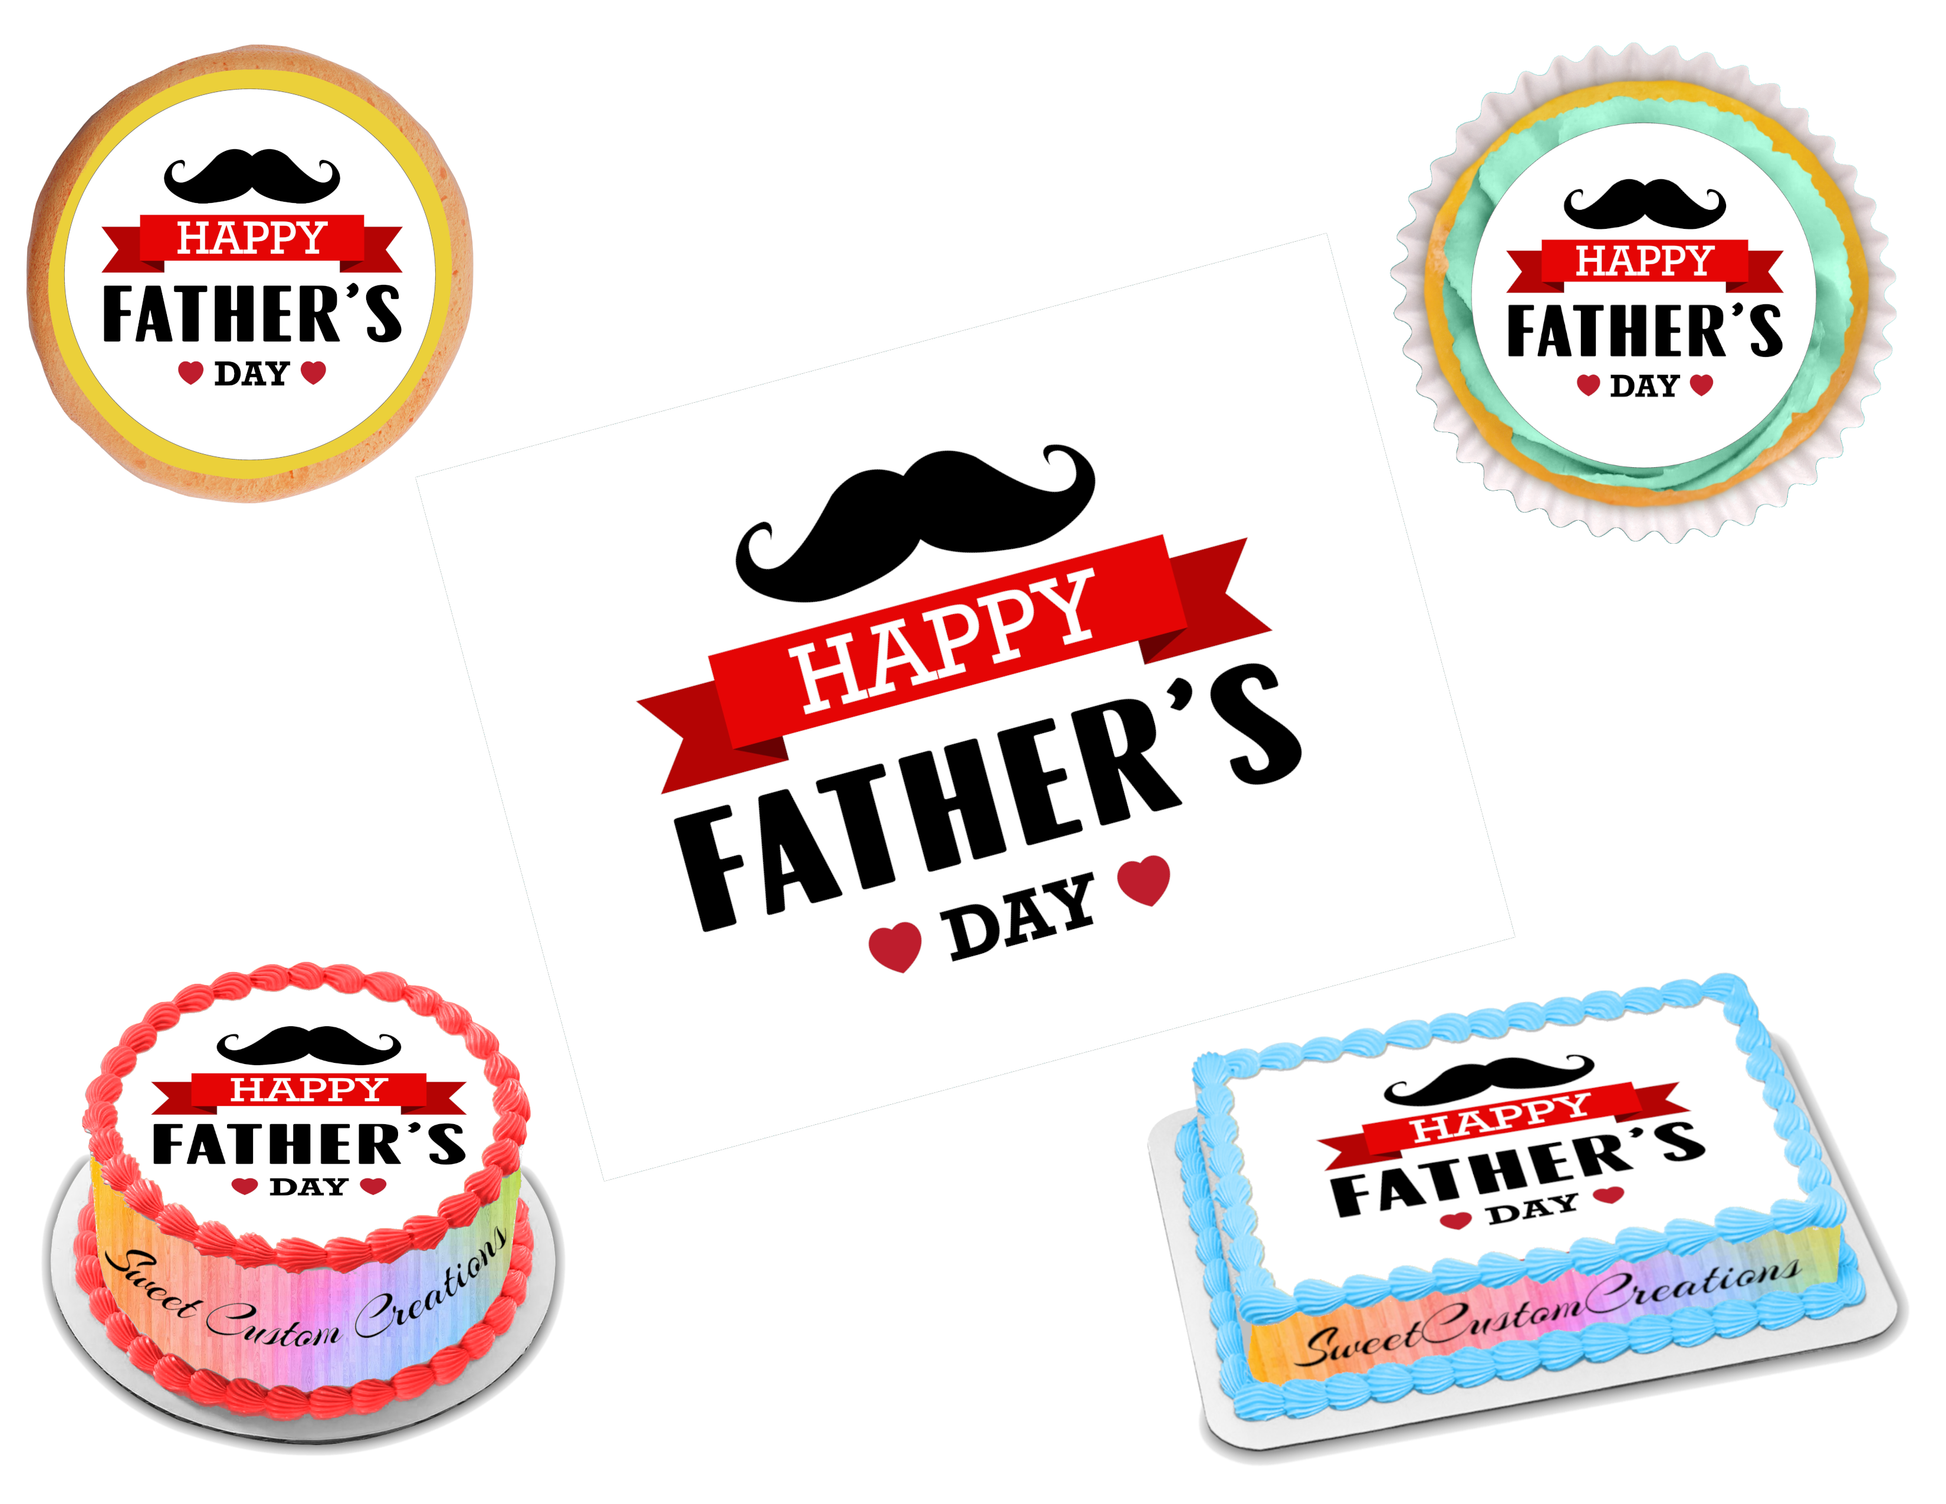 Edible Father's Day Cake Decorations, Happy Father's Day, Cupcake